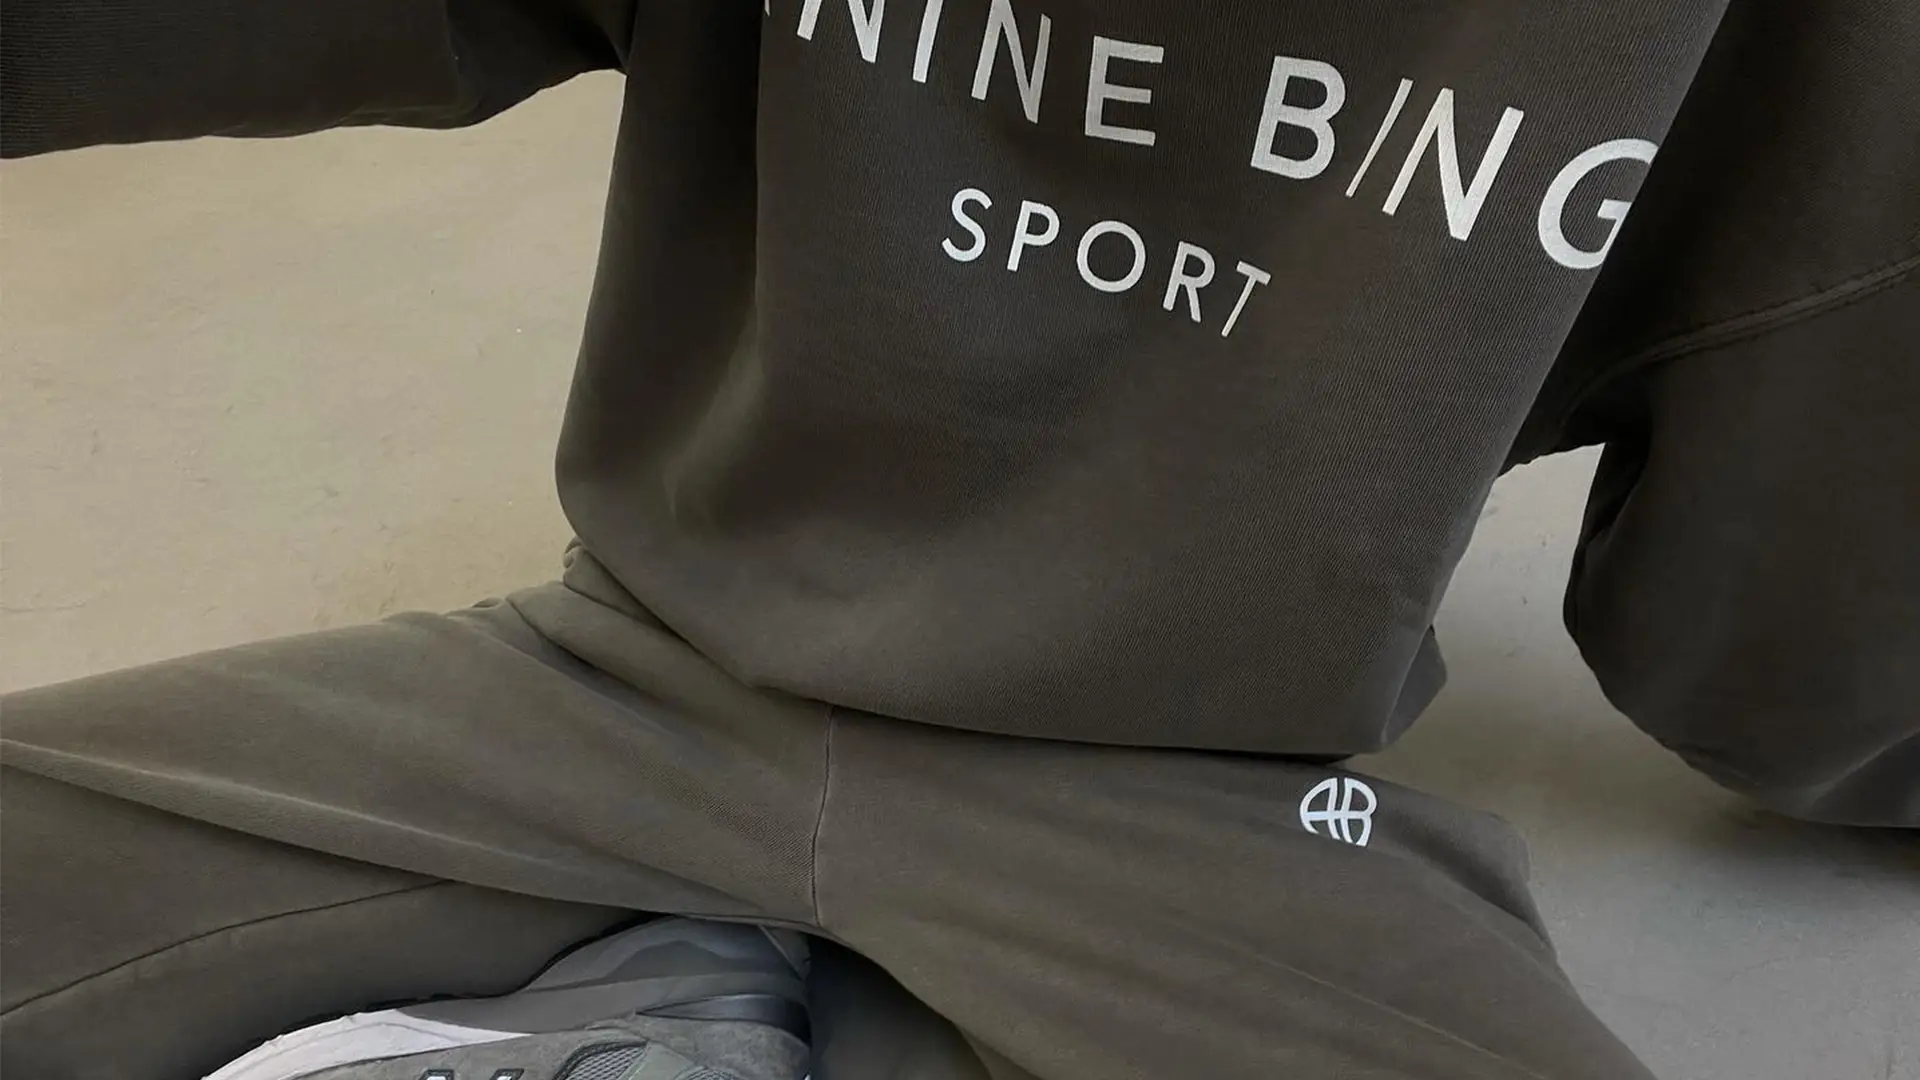 Anine Bing Outfit Style Guide  How to Wear Bing Sweatshirts, Graphic Tees  & More